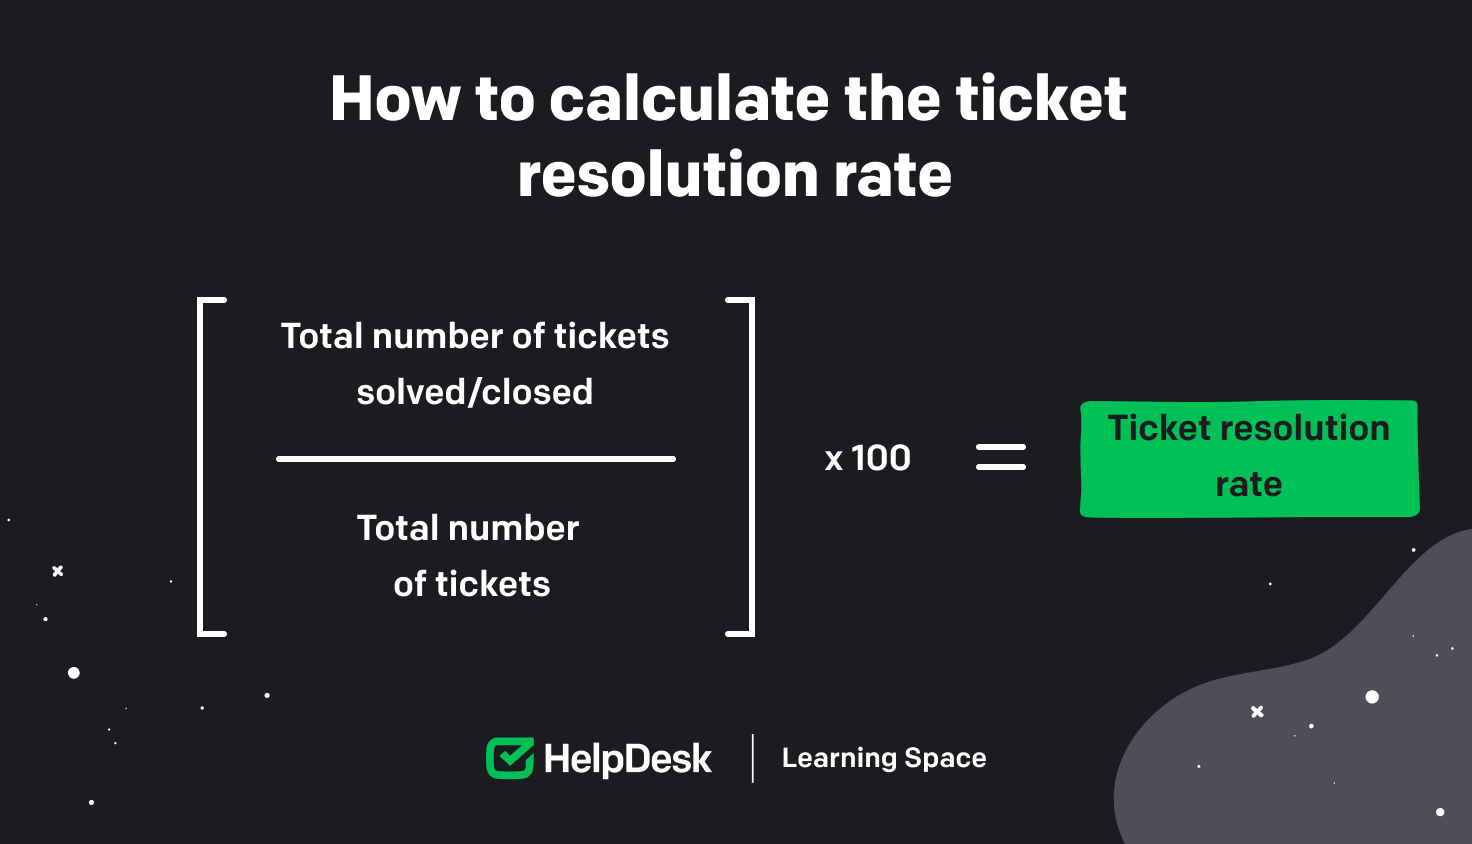 Calculation of the ticket resolution rate.